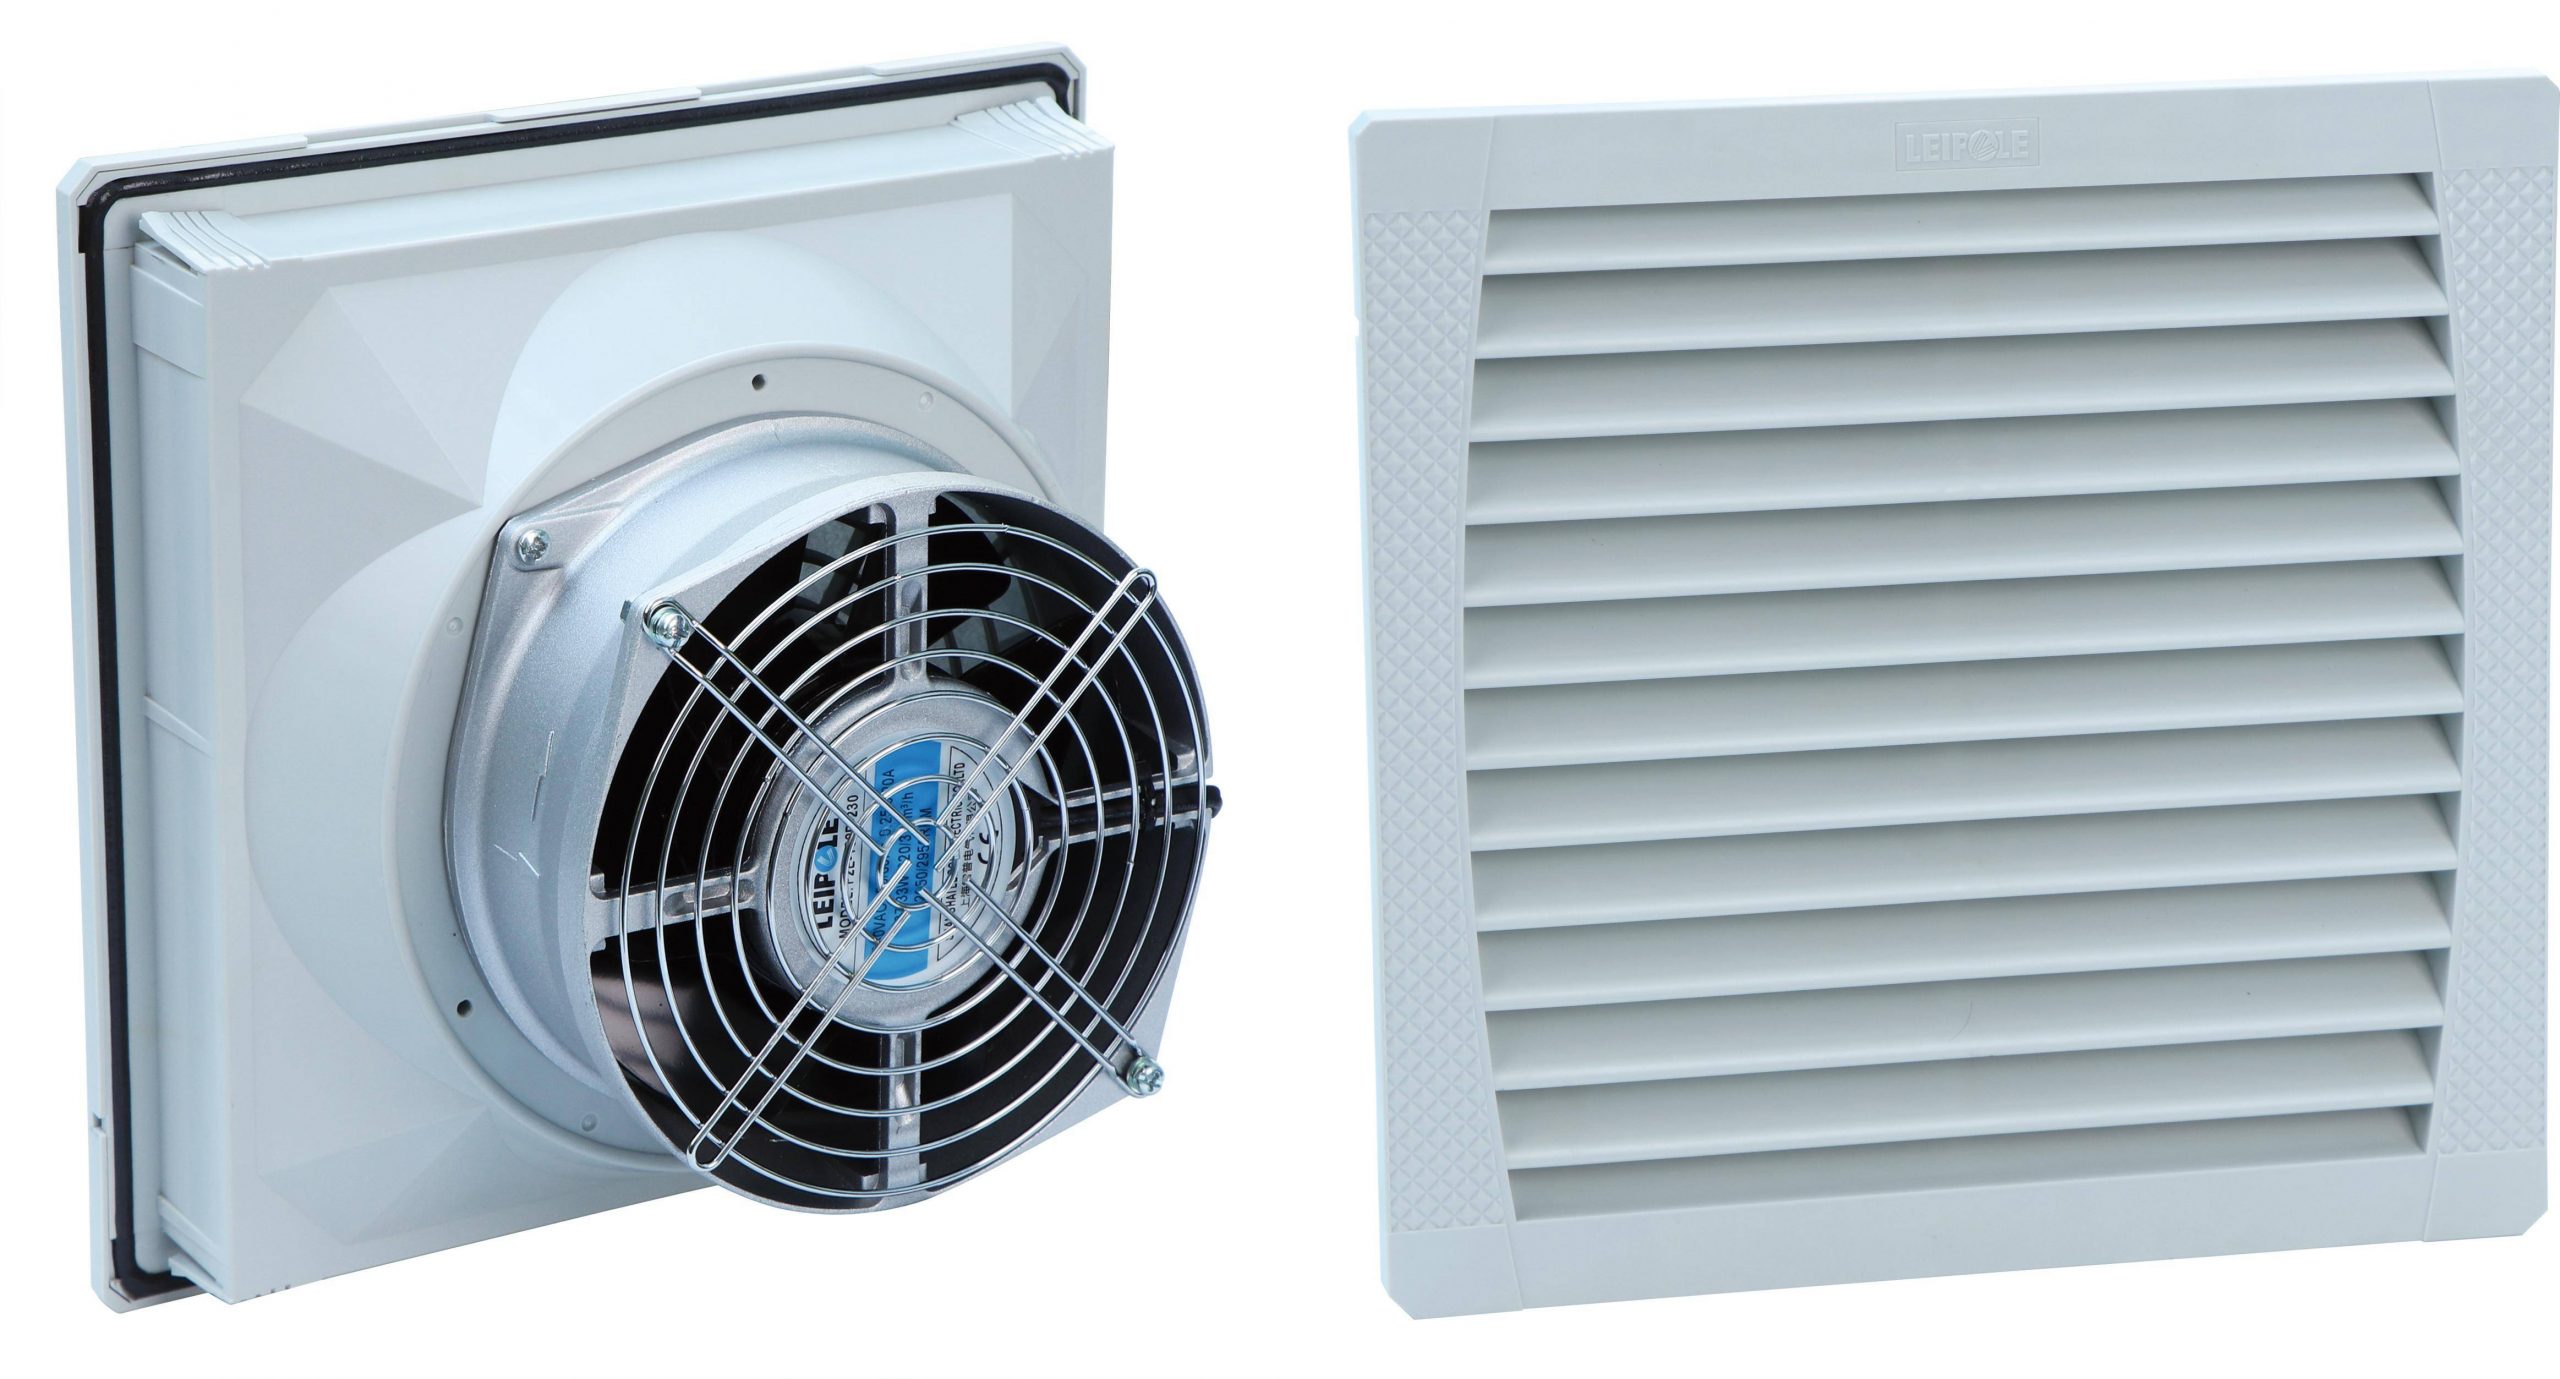 Fkl5526 High Quality Panel Mounted 320mm Rittal Exhaust Fan intended for dimensions 4652 X 2506